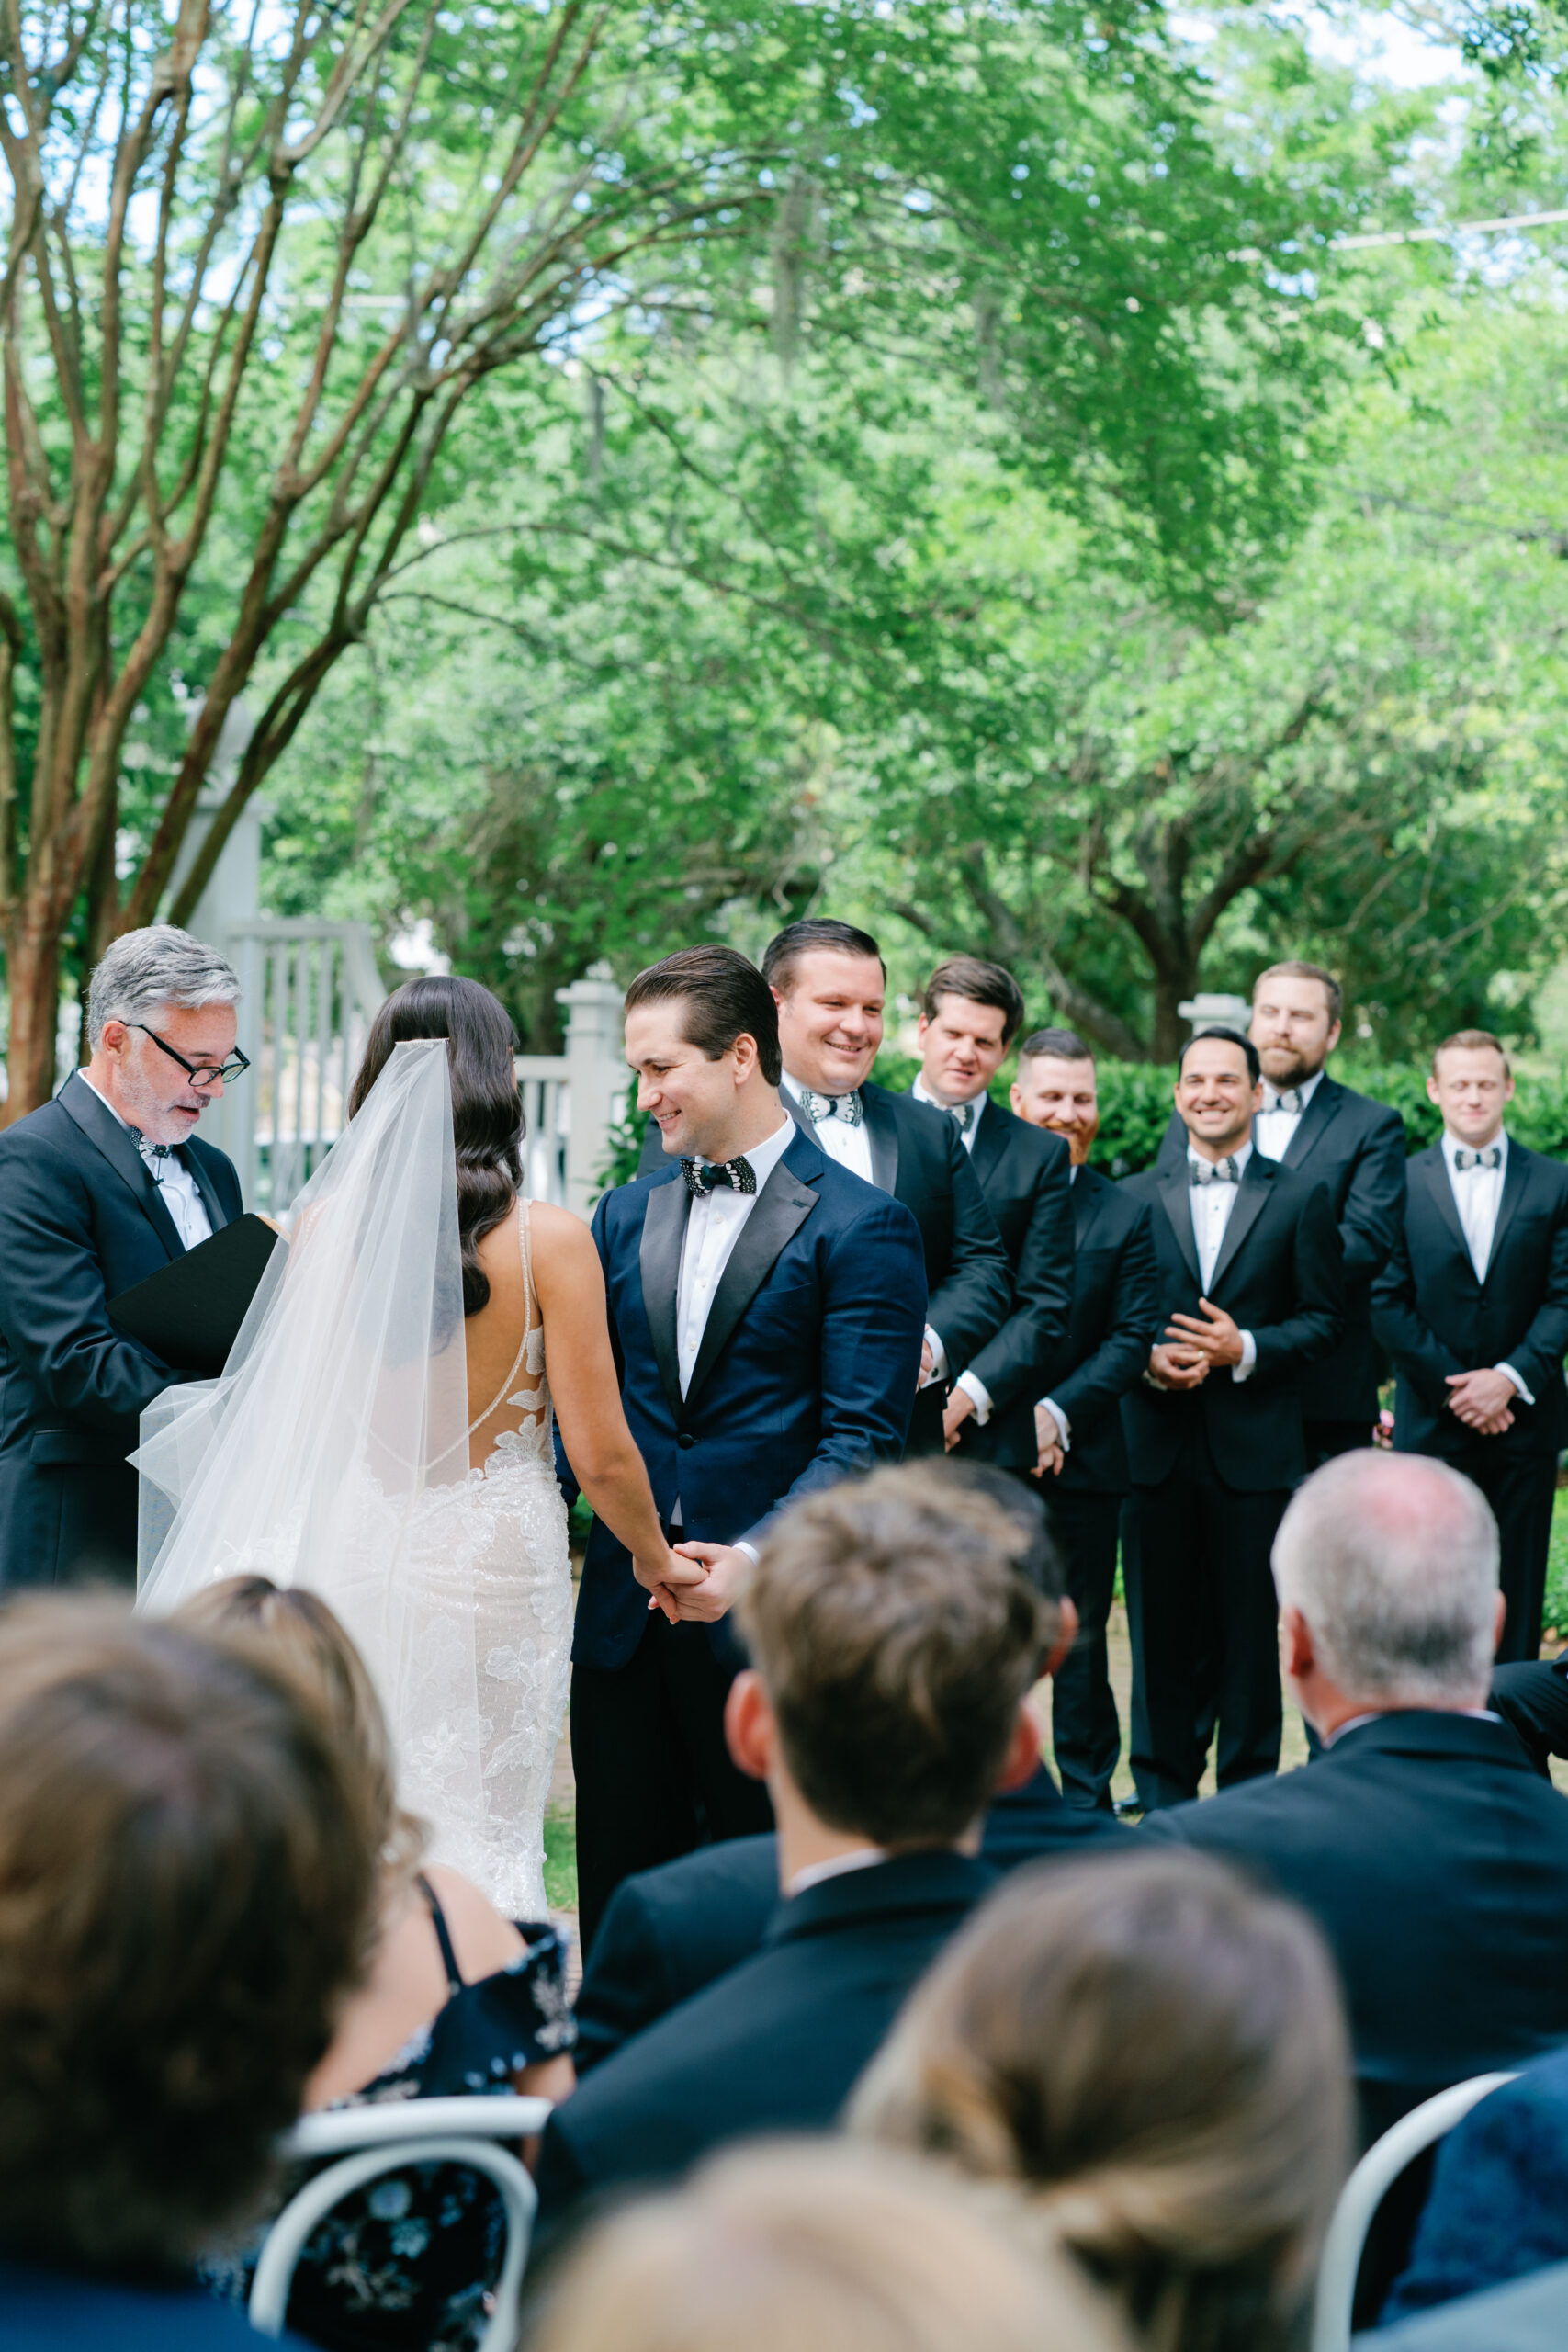 Groom and groomsmen laugh and smile during wedding ceremony.